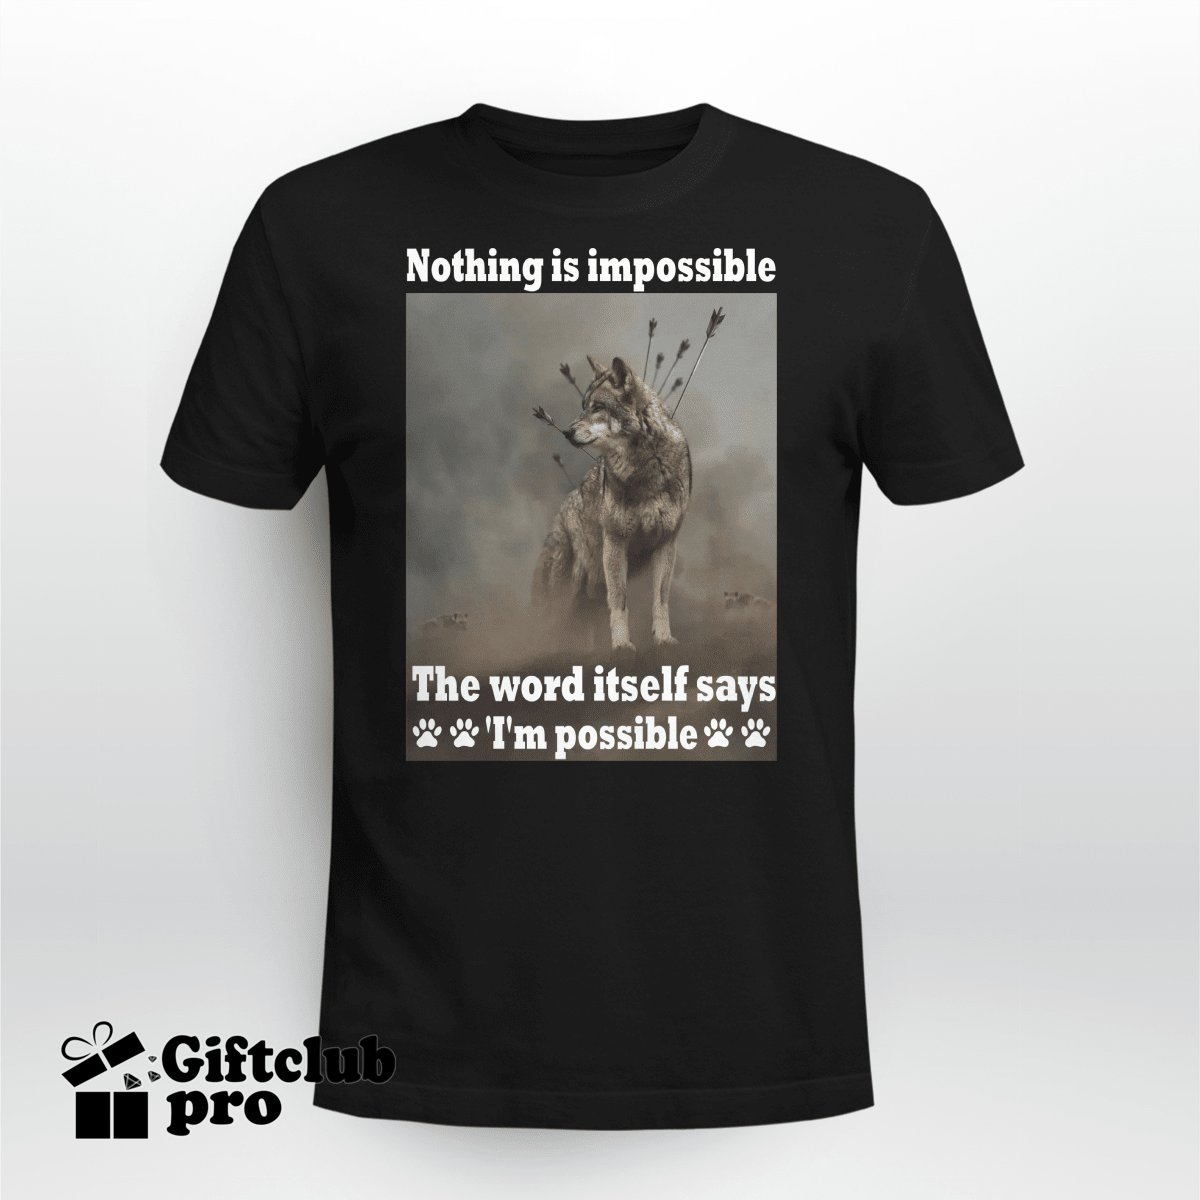 Nothing is impossible T-shirt.
giftclubpro.com/collections/wo…
#wolftshirt #wolvestshirt #dogtshirt #insparation #conqure